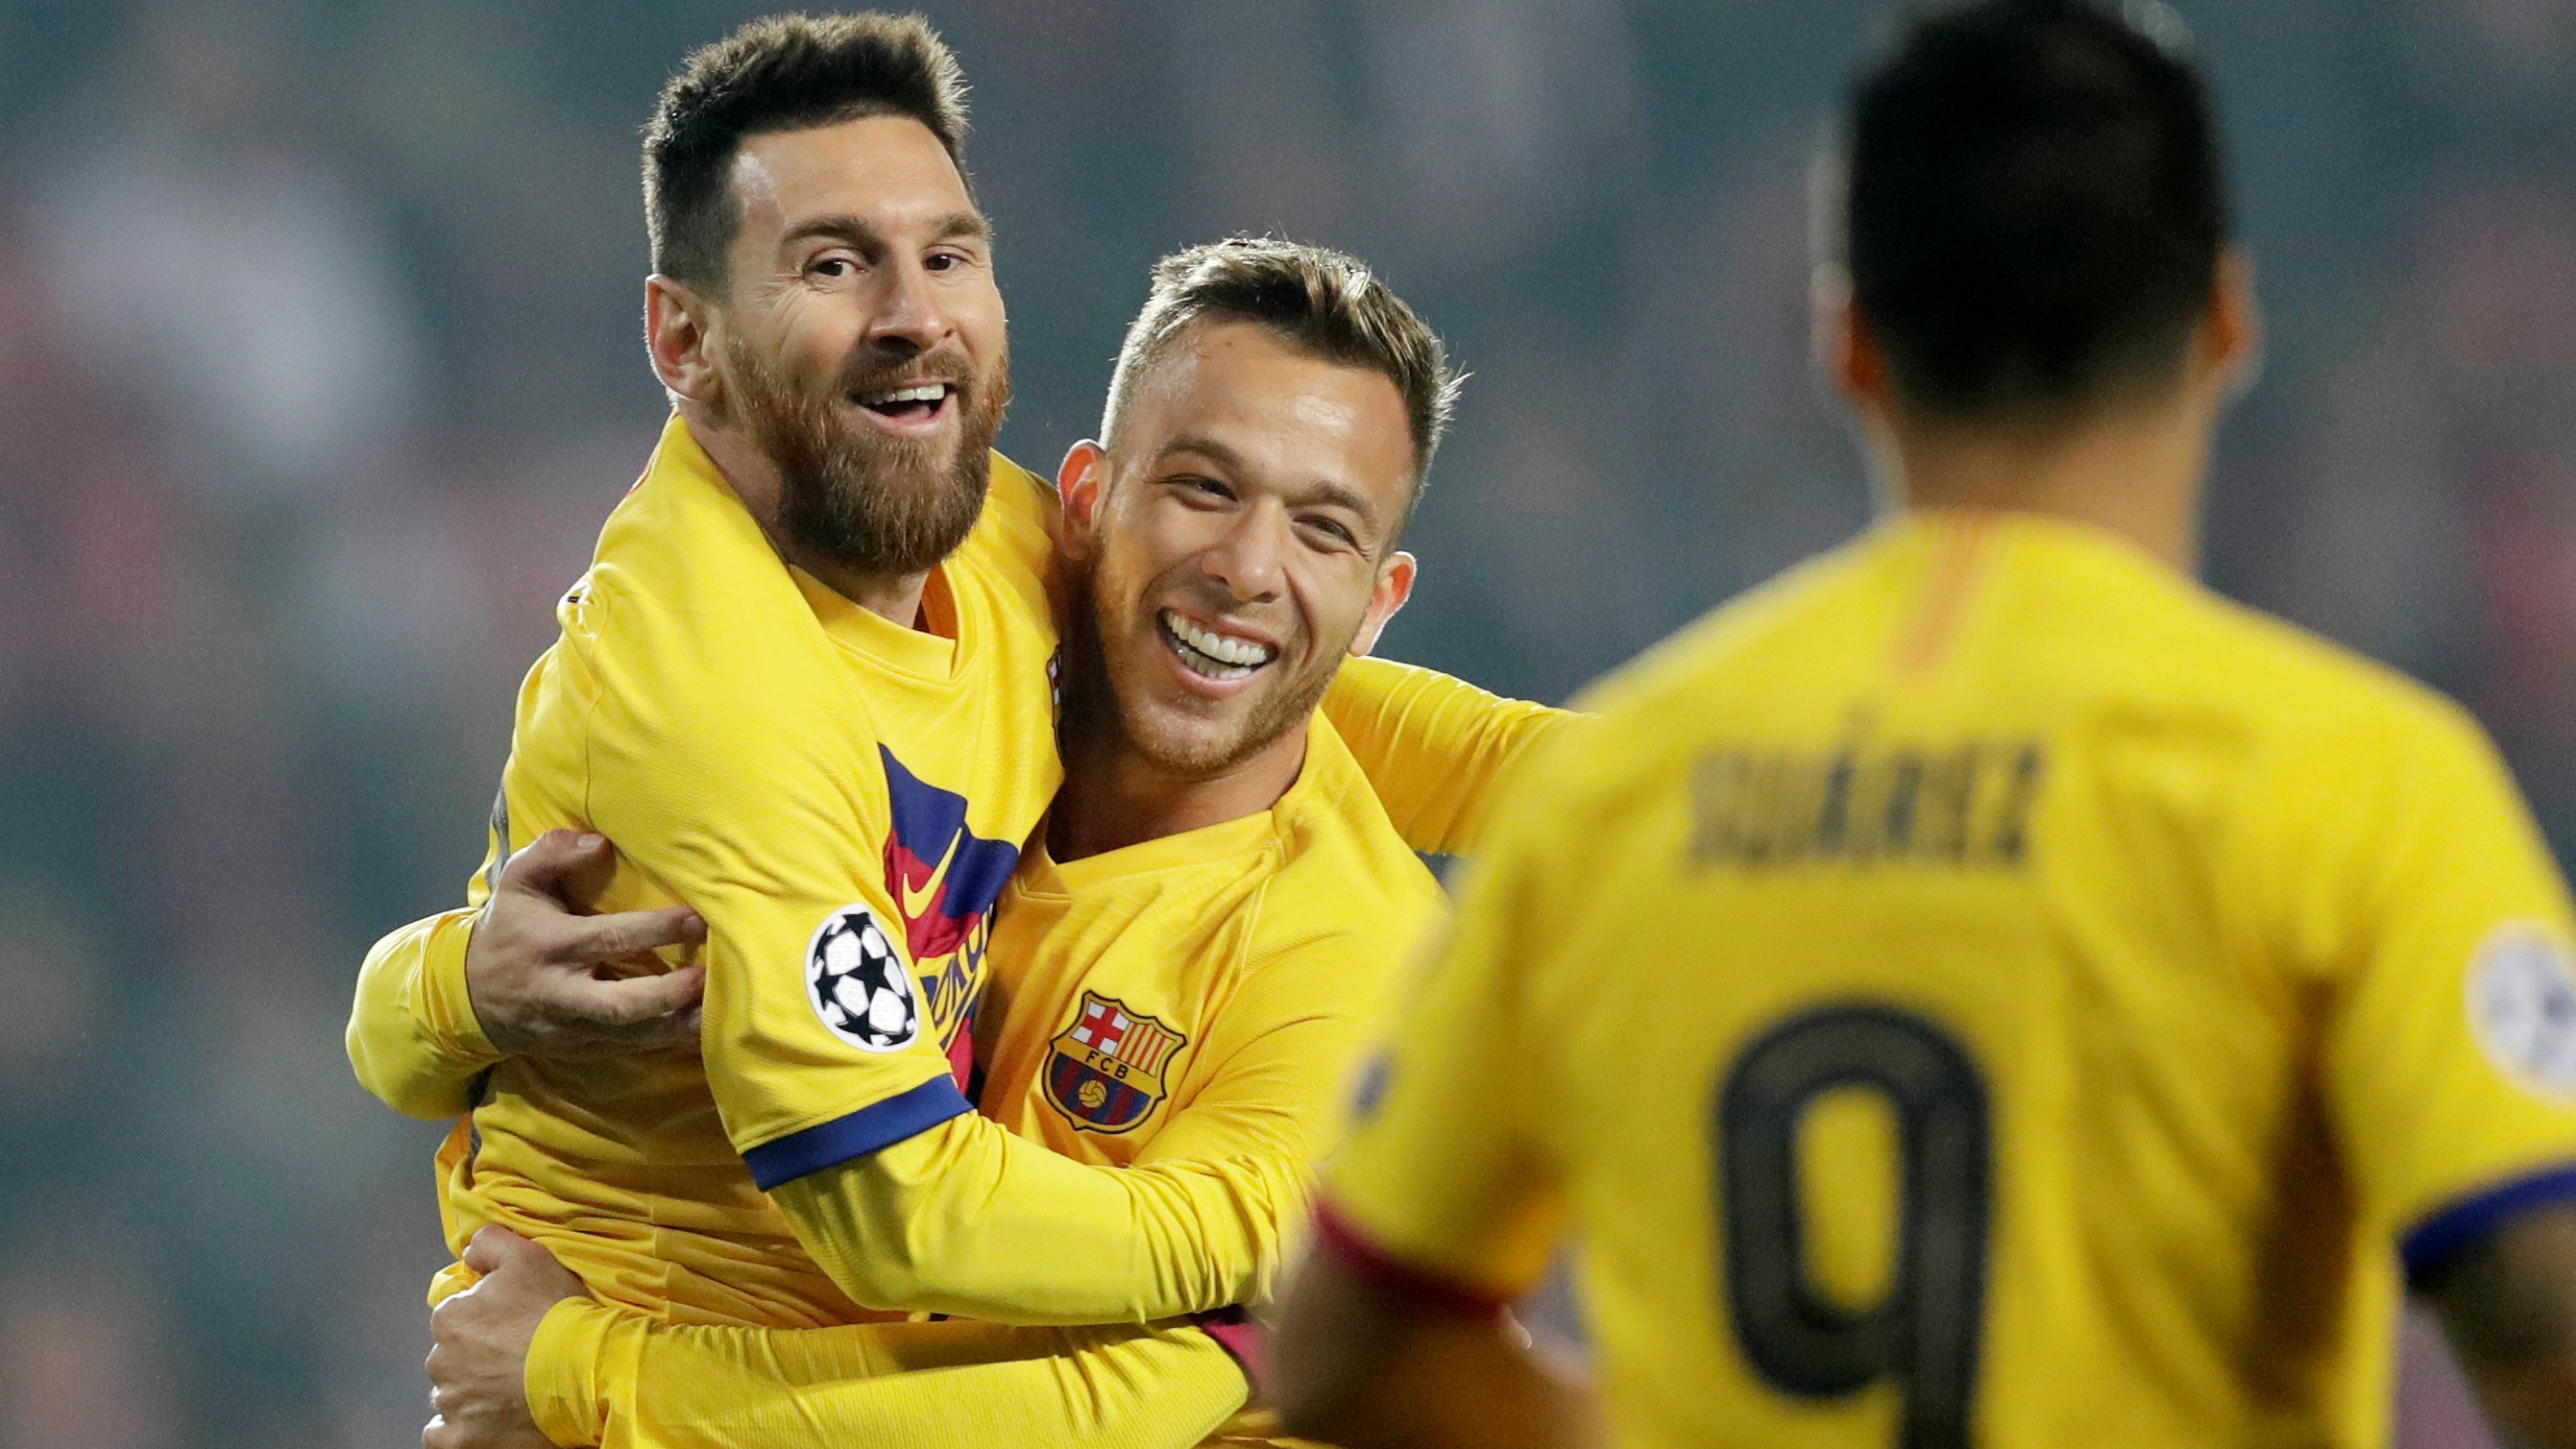 Even against their mother' - Liverpool loanee Arthur Melo reveals what  Cristiano Ronaldo, Lionel Messi and Neymar all have in common